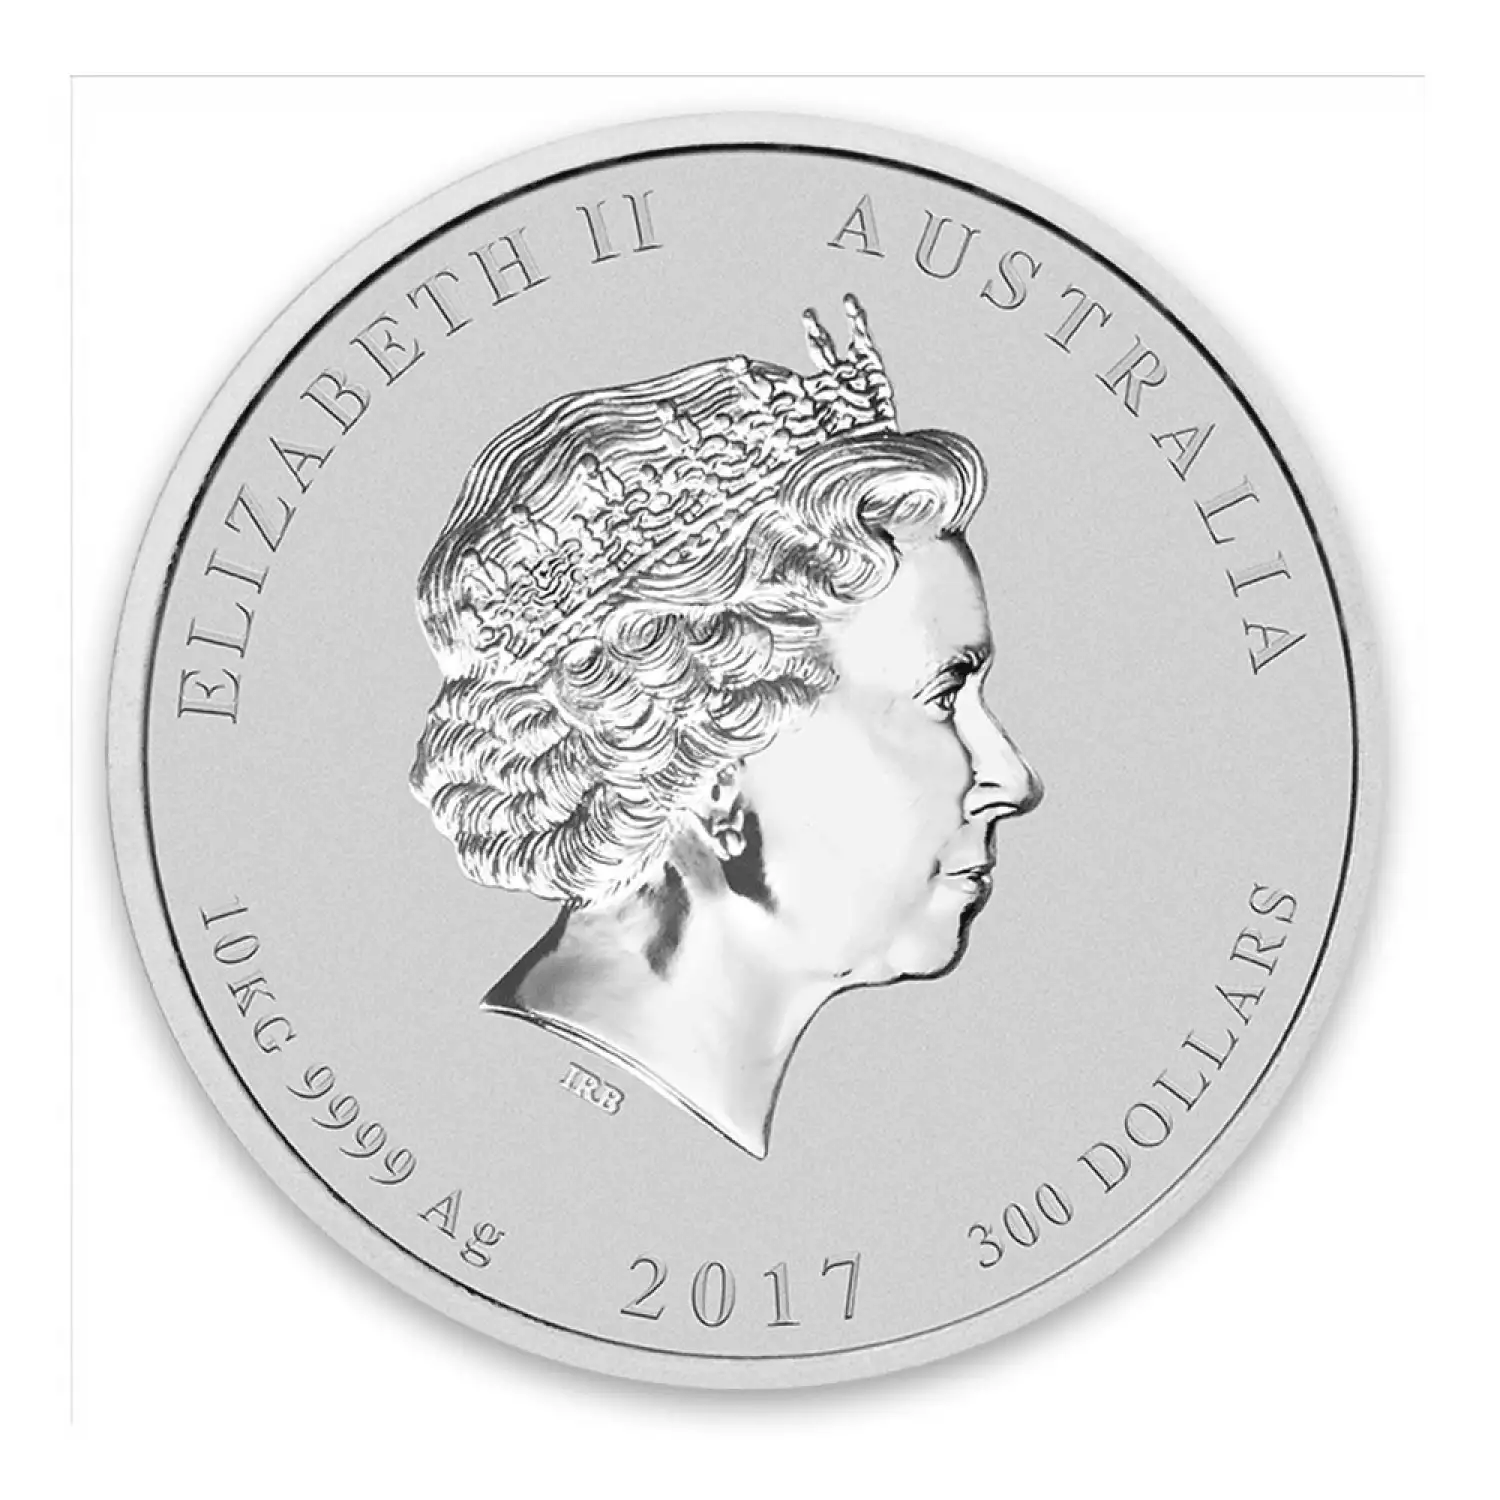 2017 10 kg Australian Perth Mint Silver Lunar II: Year of the Rooster (2)